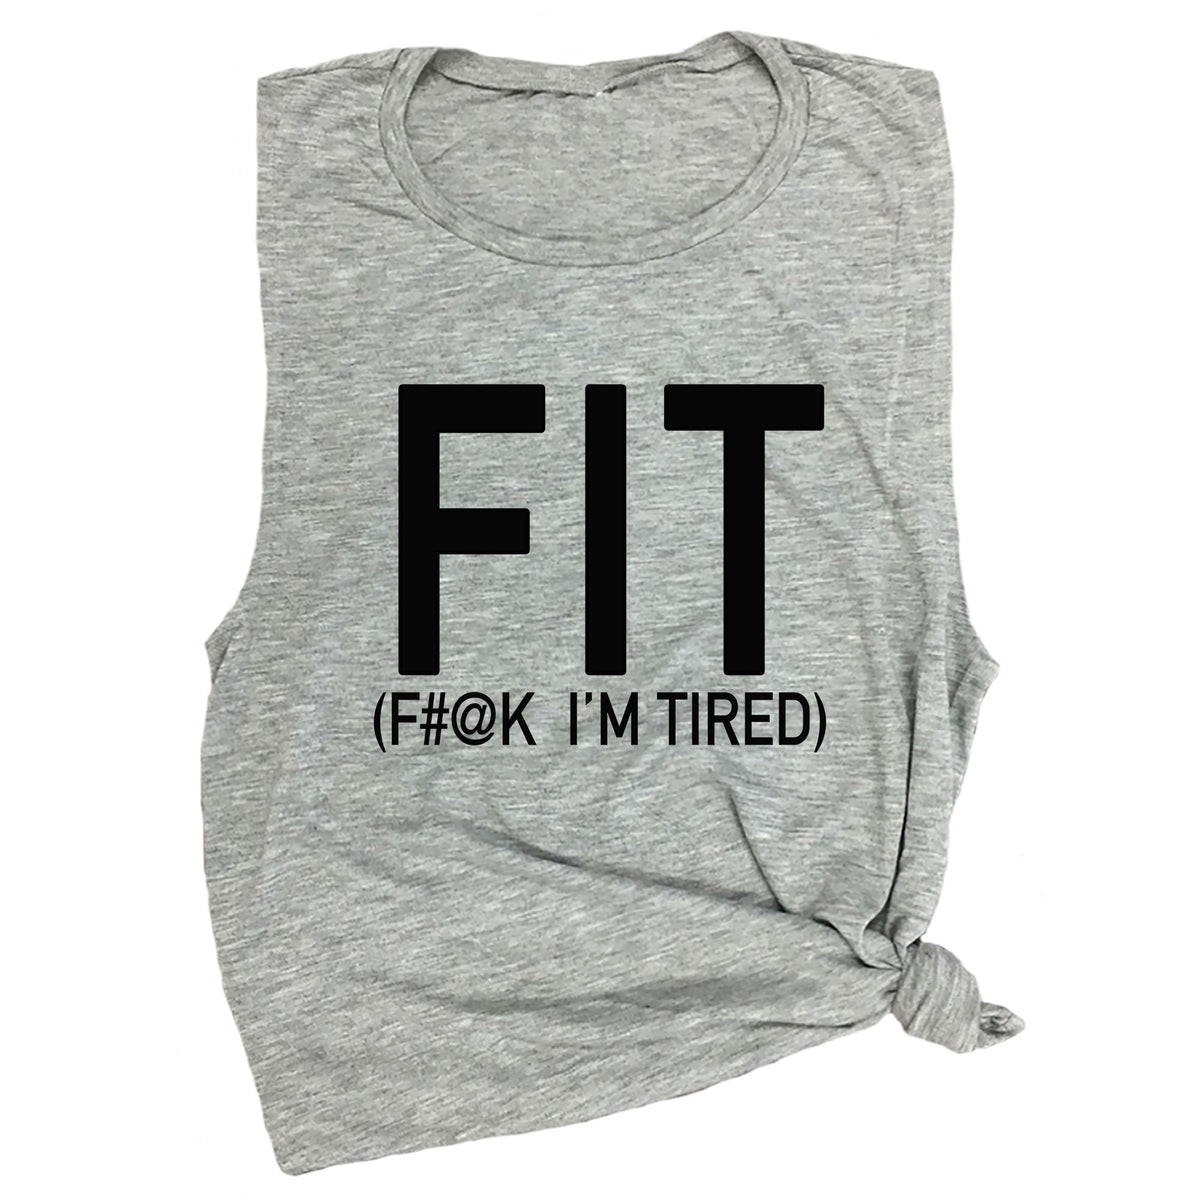 FIT (F#@K I'm Tired) Muscle Tee